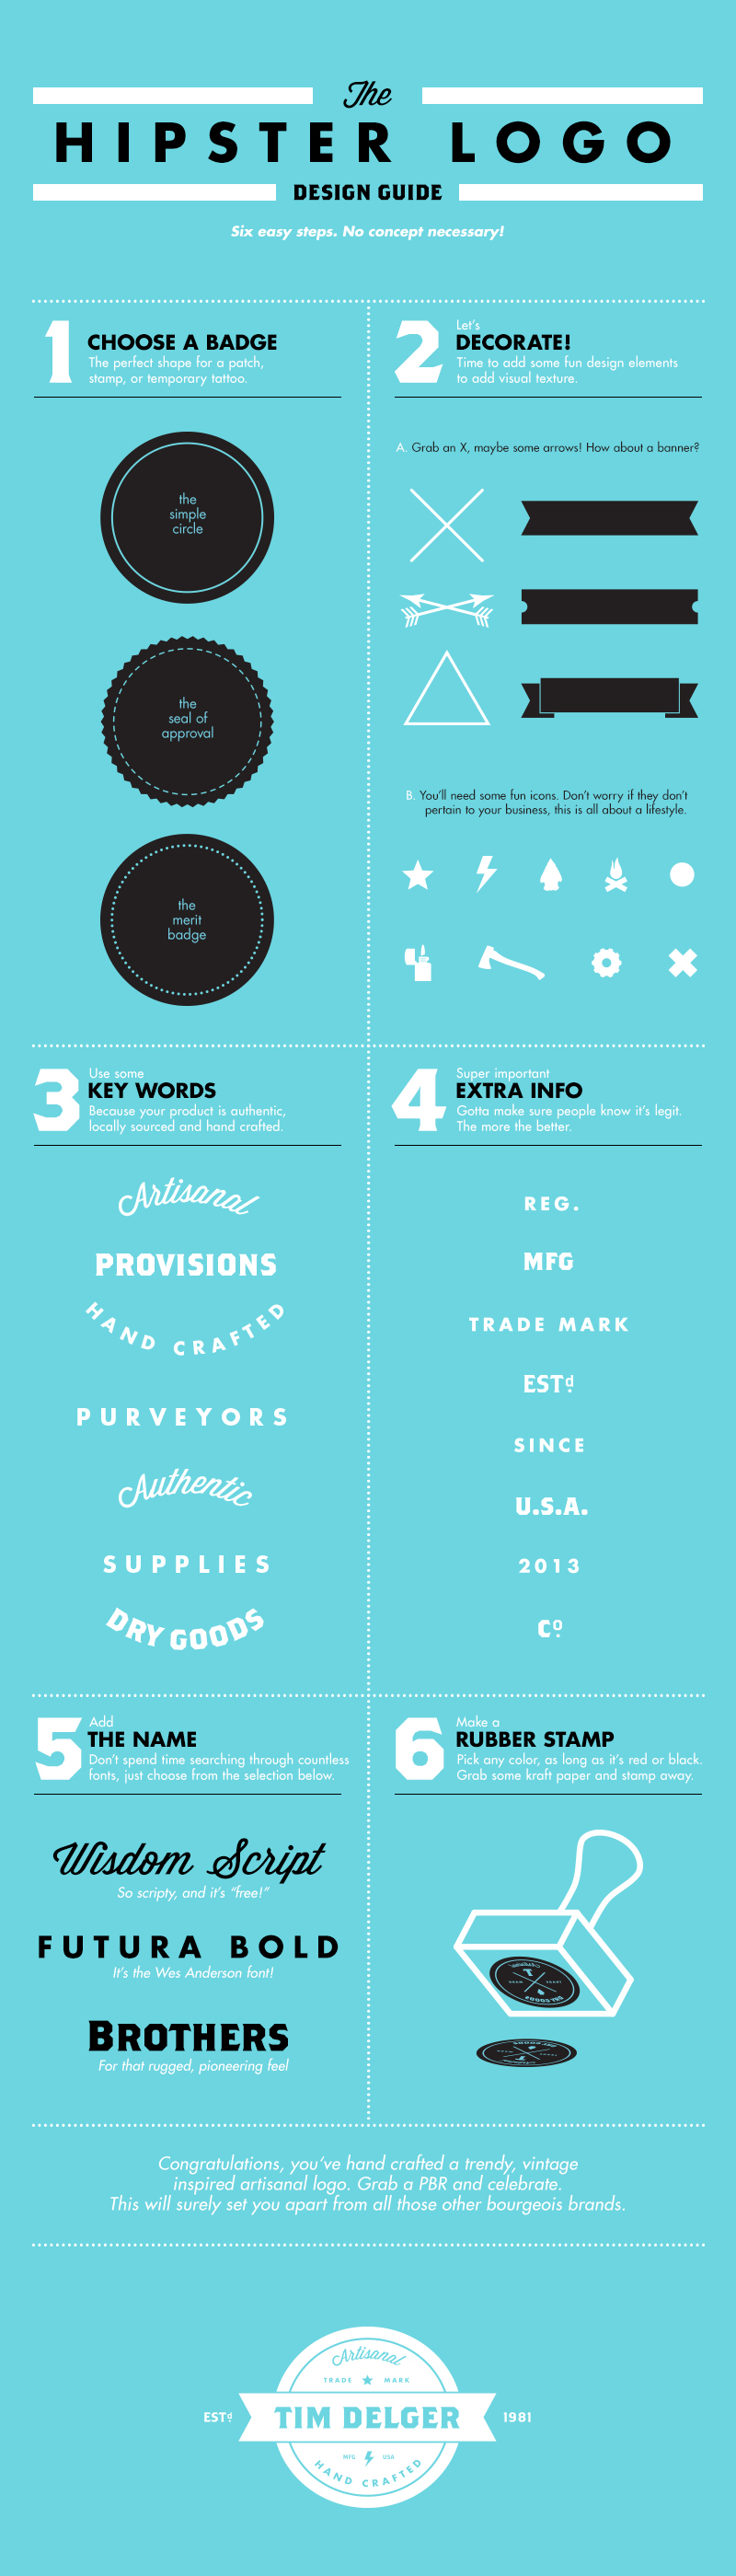 hipster logo design guide infographic